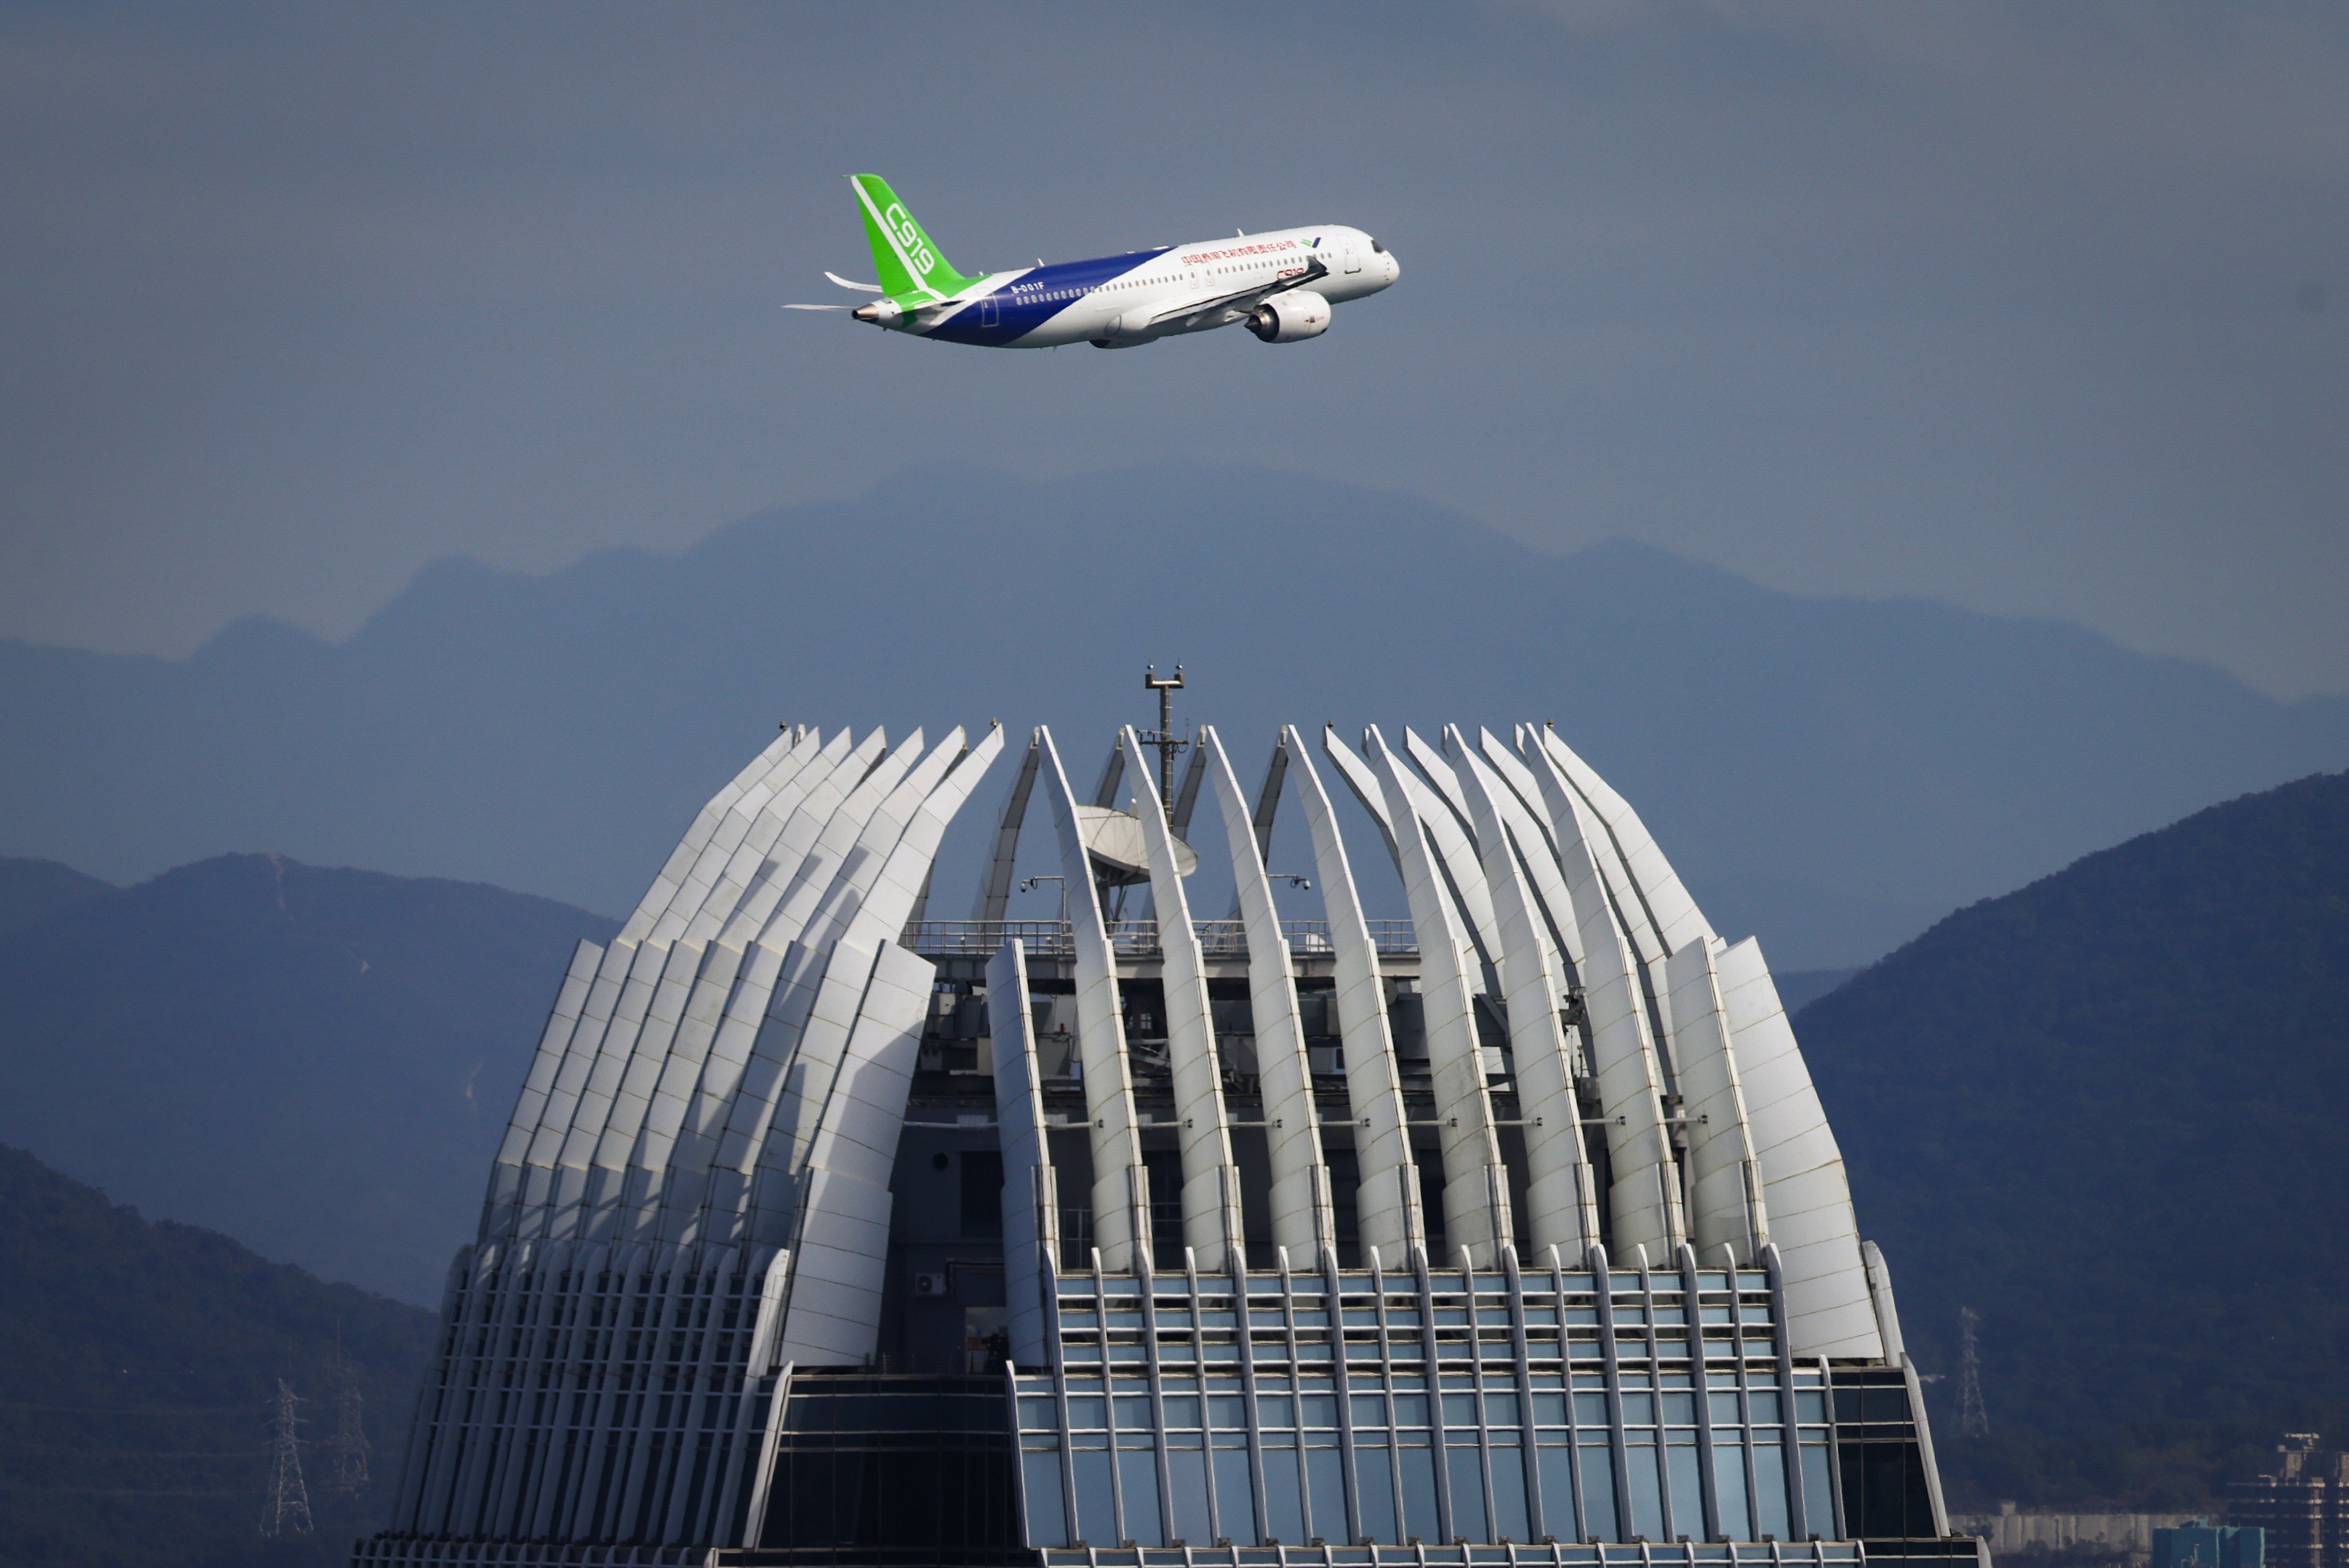 A C919 jet flies over Victoria Harbour in Hong Kong as part of a demonstration flight on December 16. Photo: Dickson Lee